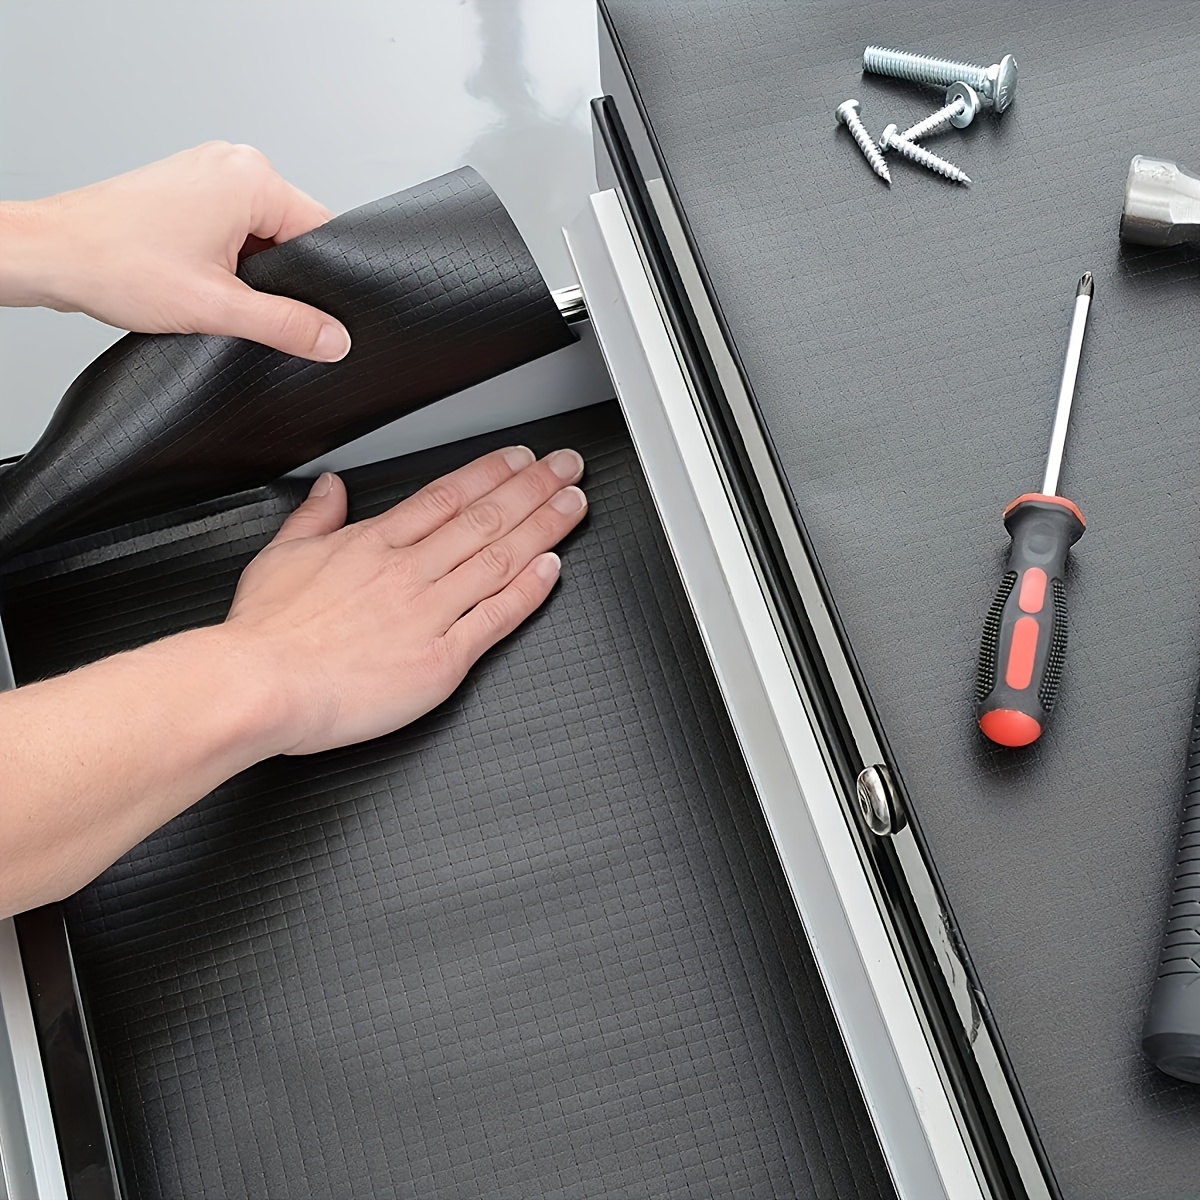 Non-Slip Shelf Liner,Tool Box Liner and Drawer Liner Is Perfect -Adjustable  Grip Liners for Drawers, Shelves, Cabinets, Storage, Kitchen and Desks